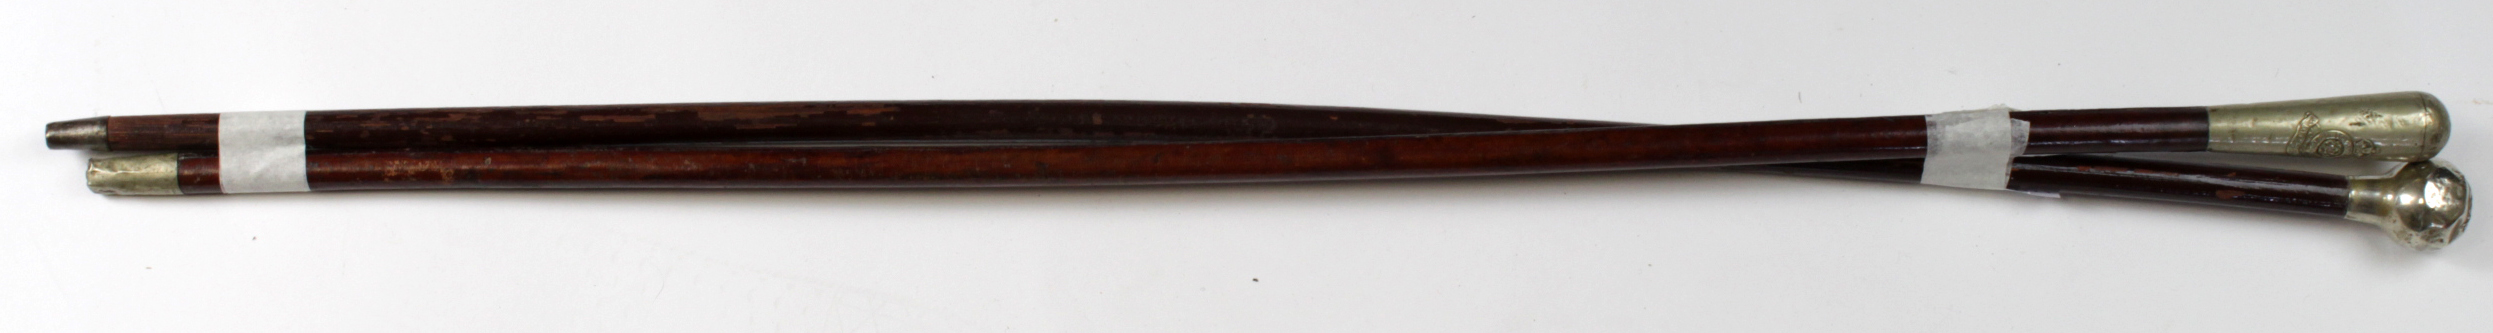 Swagger sticks, a Royal Fusiliers example, the second unidentified. (2)